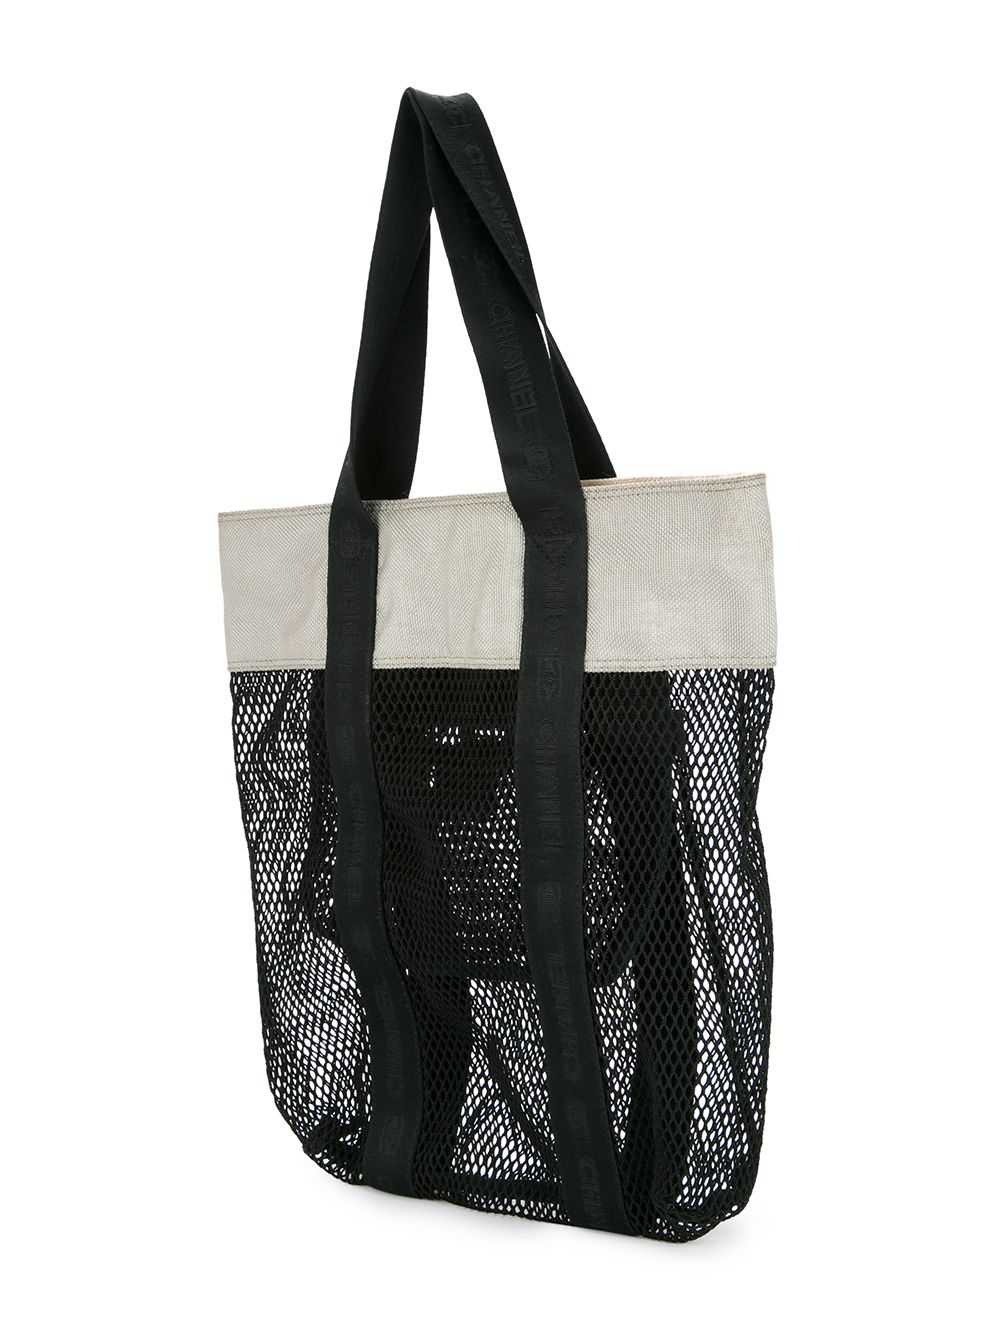 CHANEL Pre-Owned Sports Line shopping bag - Black - image 3